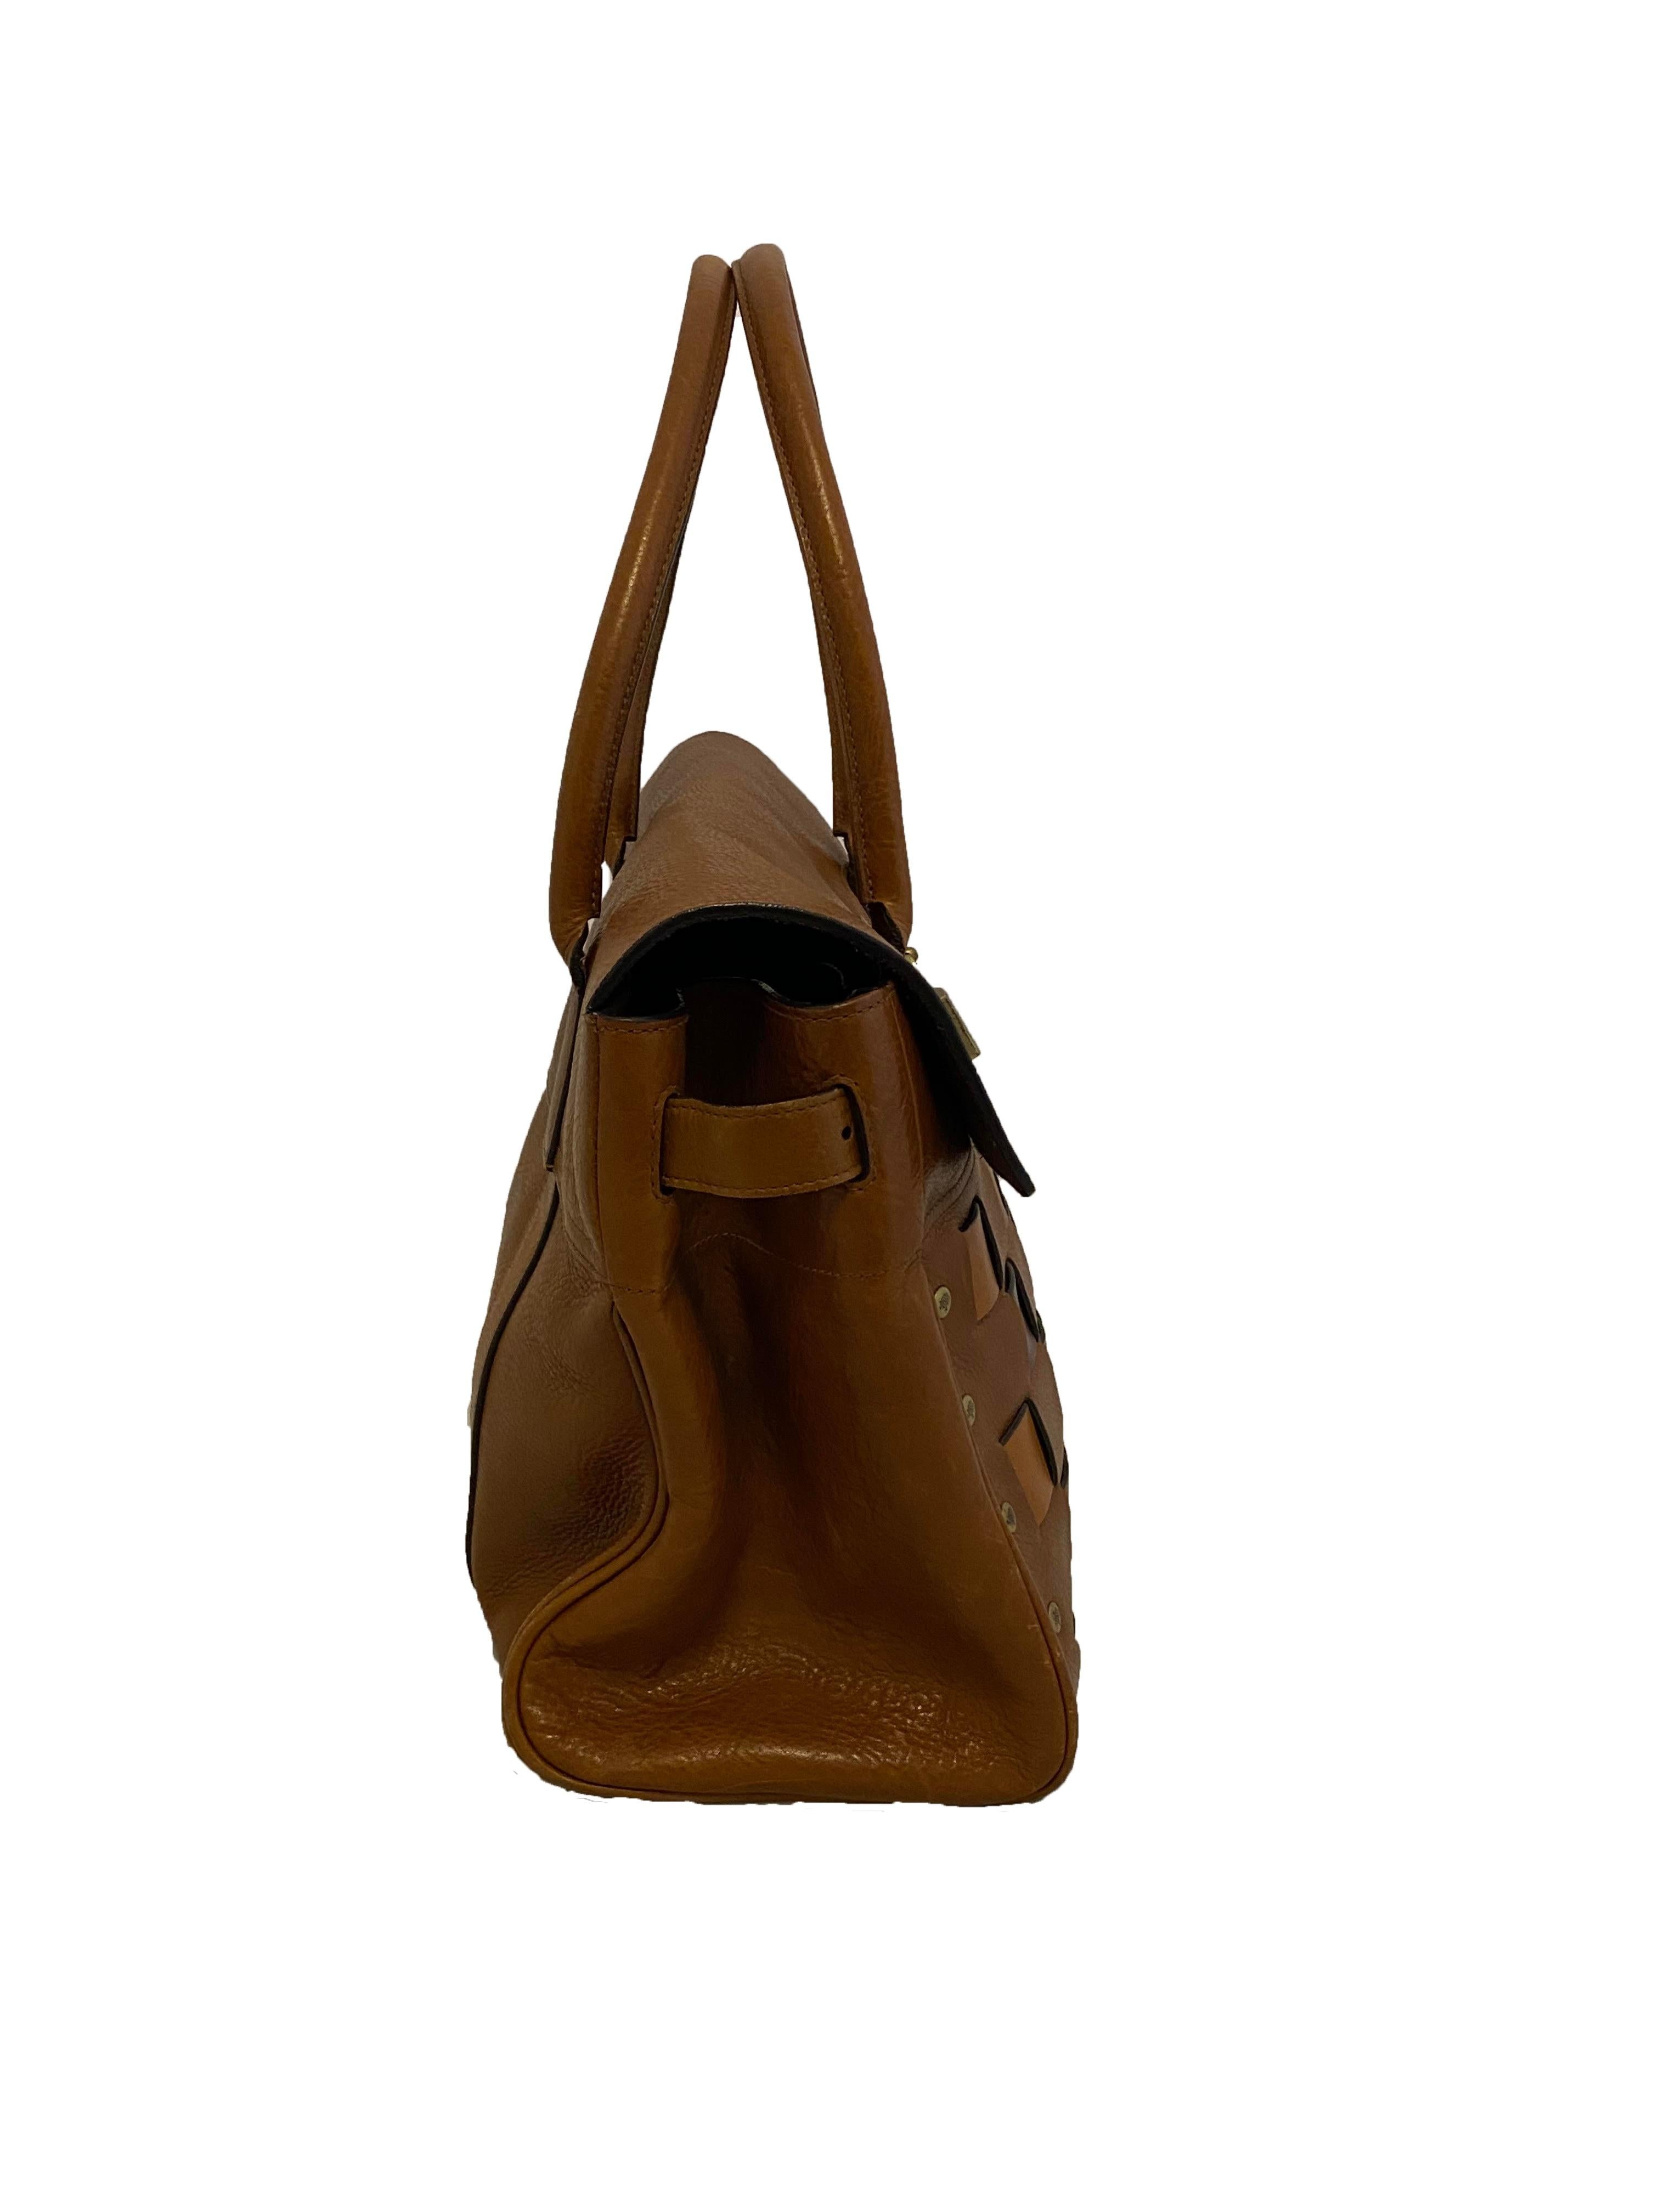 Women's Woven Leather Mulberry Bayswater Bag For Sale